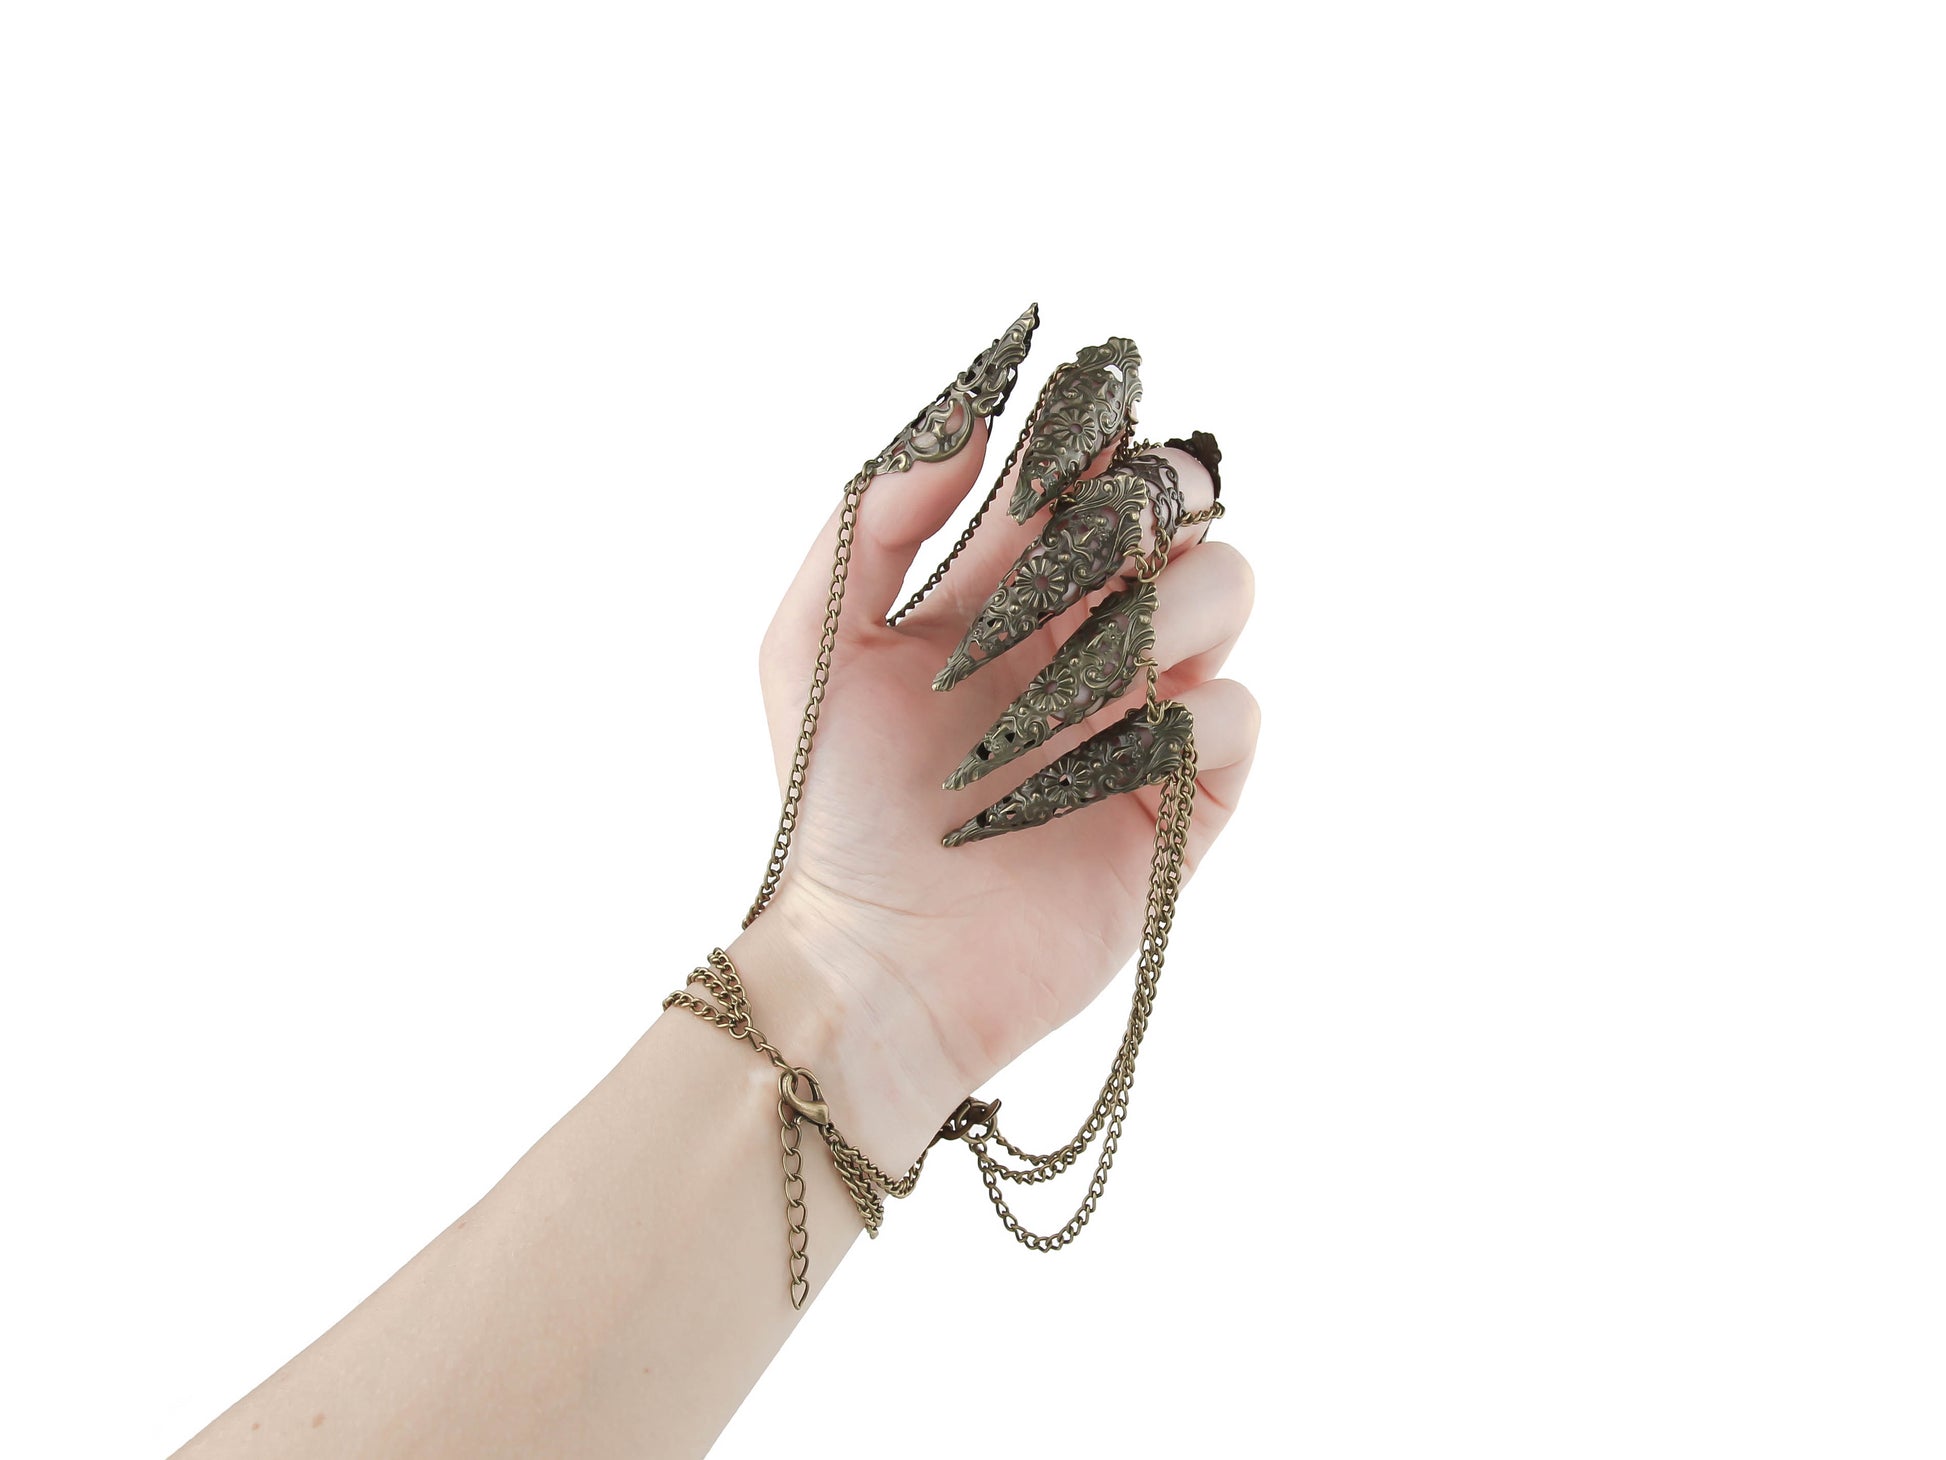 An elevated hand displays a striking Myril Jewels bronze hand chain bracelet with elaborate claws, fusing dark avant-garde with neo-gothic flair. Ideal for those who adore gothic-chic style, this piece adds a dramatic touch to any ensemble, be it for Halloween, festival wear, or as an everyday statement.